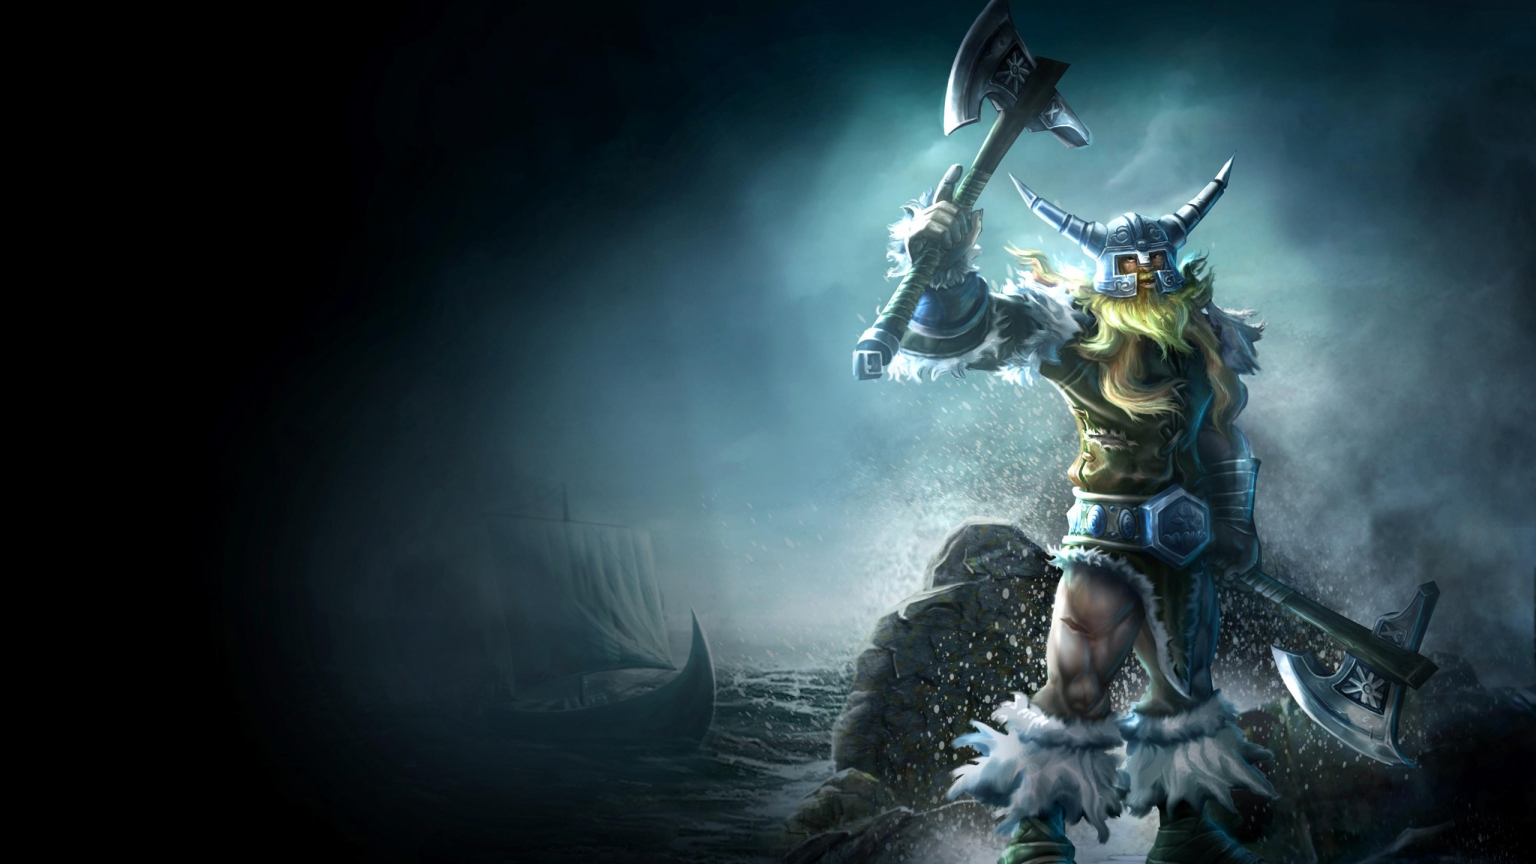 Olaf League of Legends for 1536 x 864 HDTV resolution